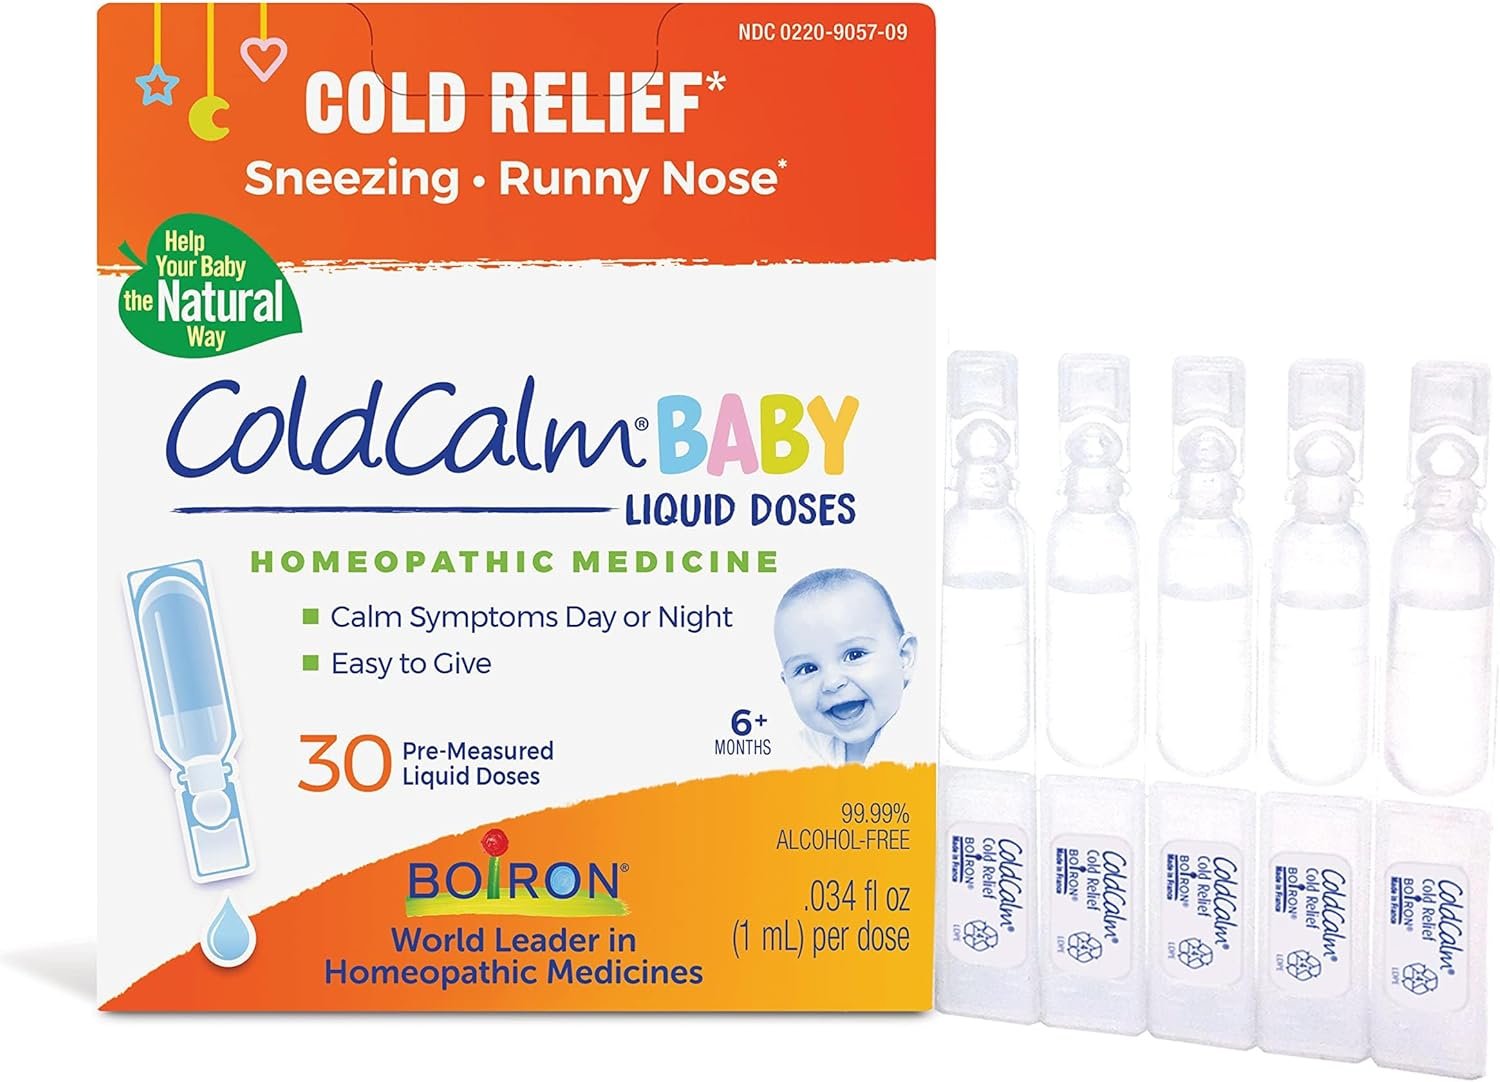 Worldwide Nutrition Bundle: Boiron ColdCalm Baby Single-Use Drops for Relief from Cold Symptoms of Sneezing, Runny Nose, and Nasal Congestion - Sterile and Non-Drowsy Liquid Doses - 30 Ct and Keychain